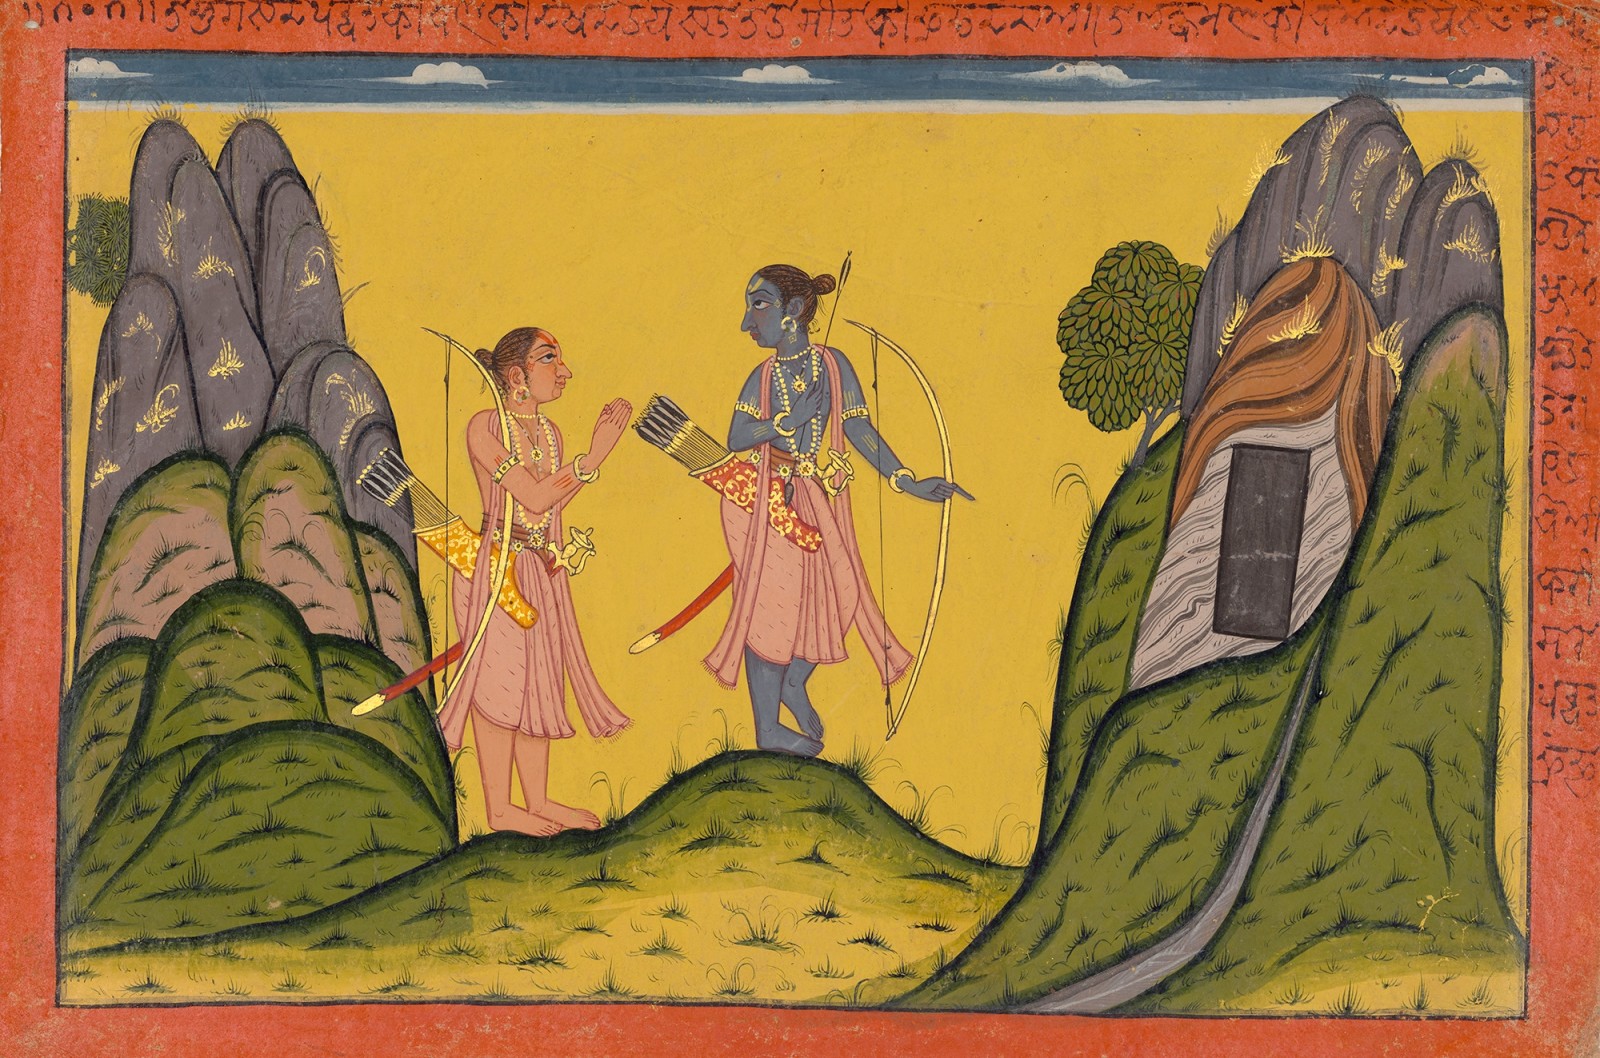 Lakshmana expresses his foreboding to Rama outside the cave of Ayomukhi, Page from the Aranya Kanda or Forest Book of the Ramayana , By a Master of Style IV of the ‘Shangri’ Ramayana, c. 1710-1740